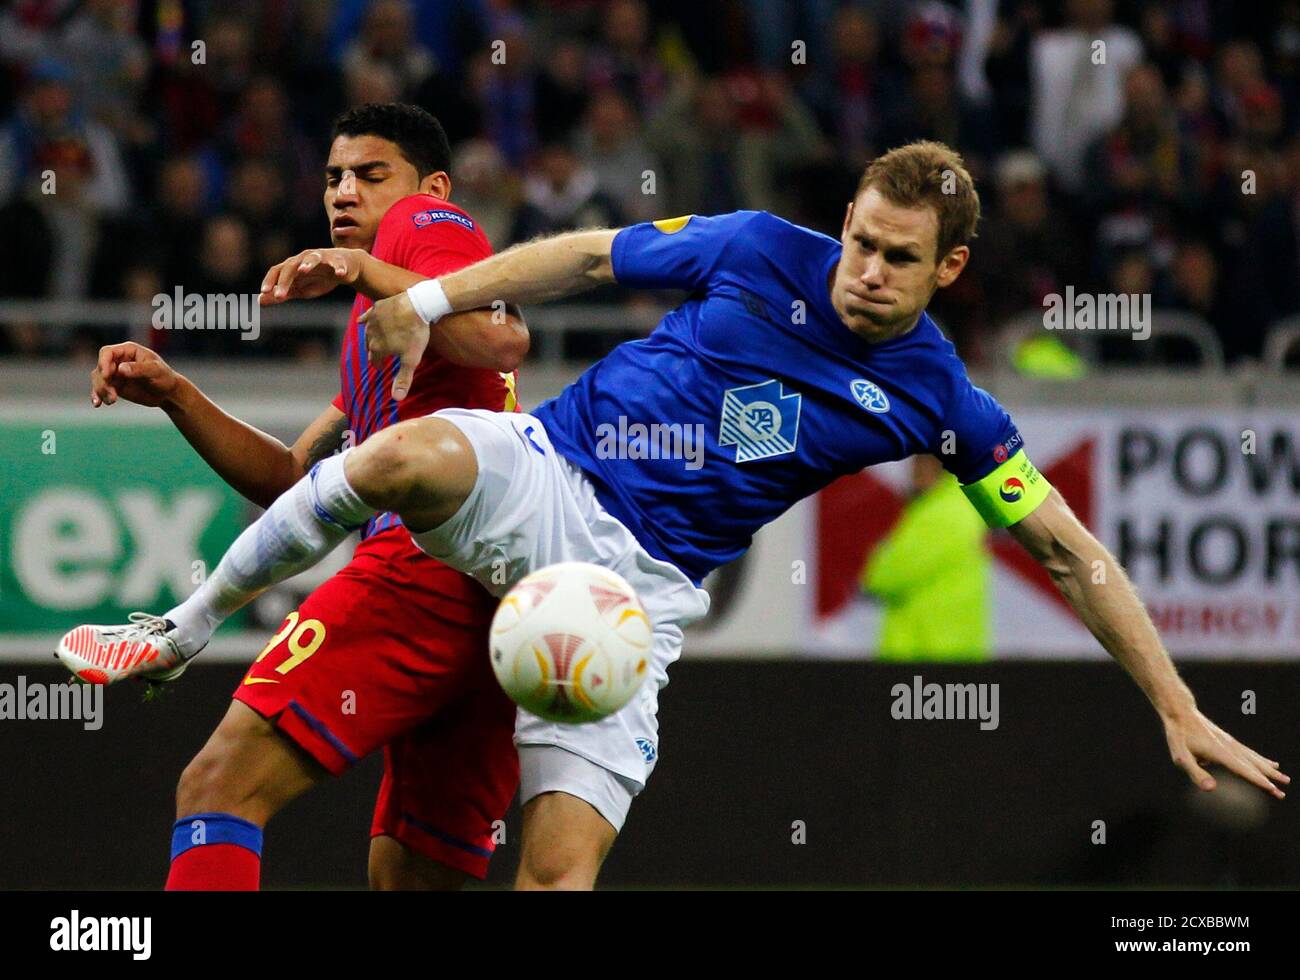 Steaua Bucharest's Adi Sobrinho (L) challenges Molde's Boerre Steenslid  during their Europa League Group E soccer match at National Arena in  Bucharest October 25, 2012. REUTERS/Bogdan Cristel (ROMANIA - Tags: SPORT  SOCCER